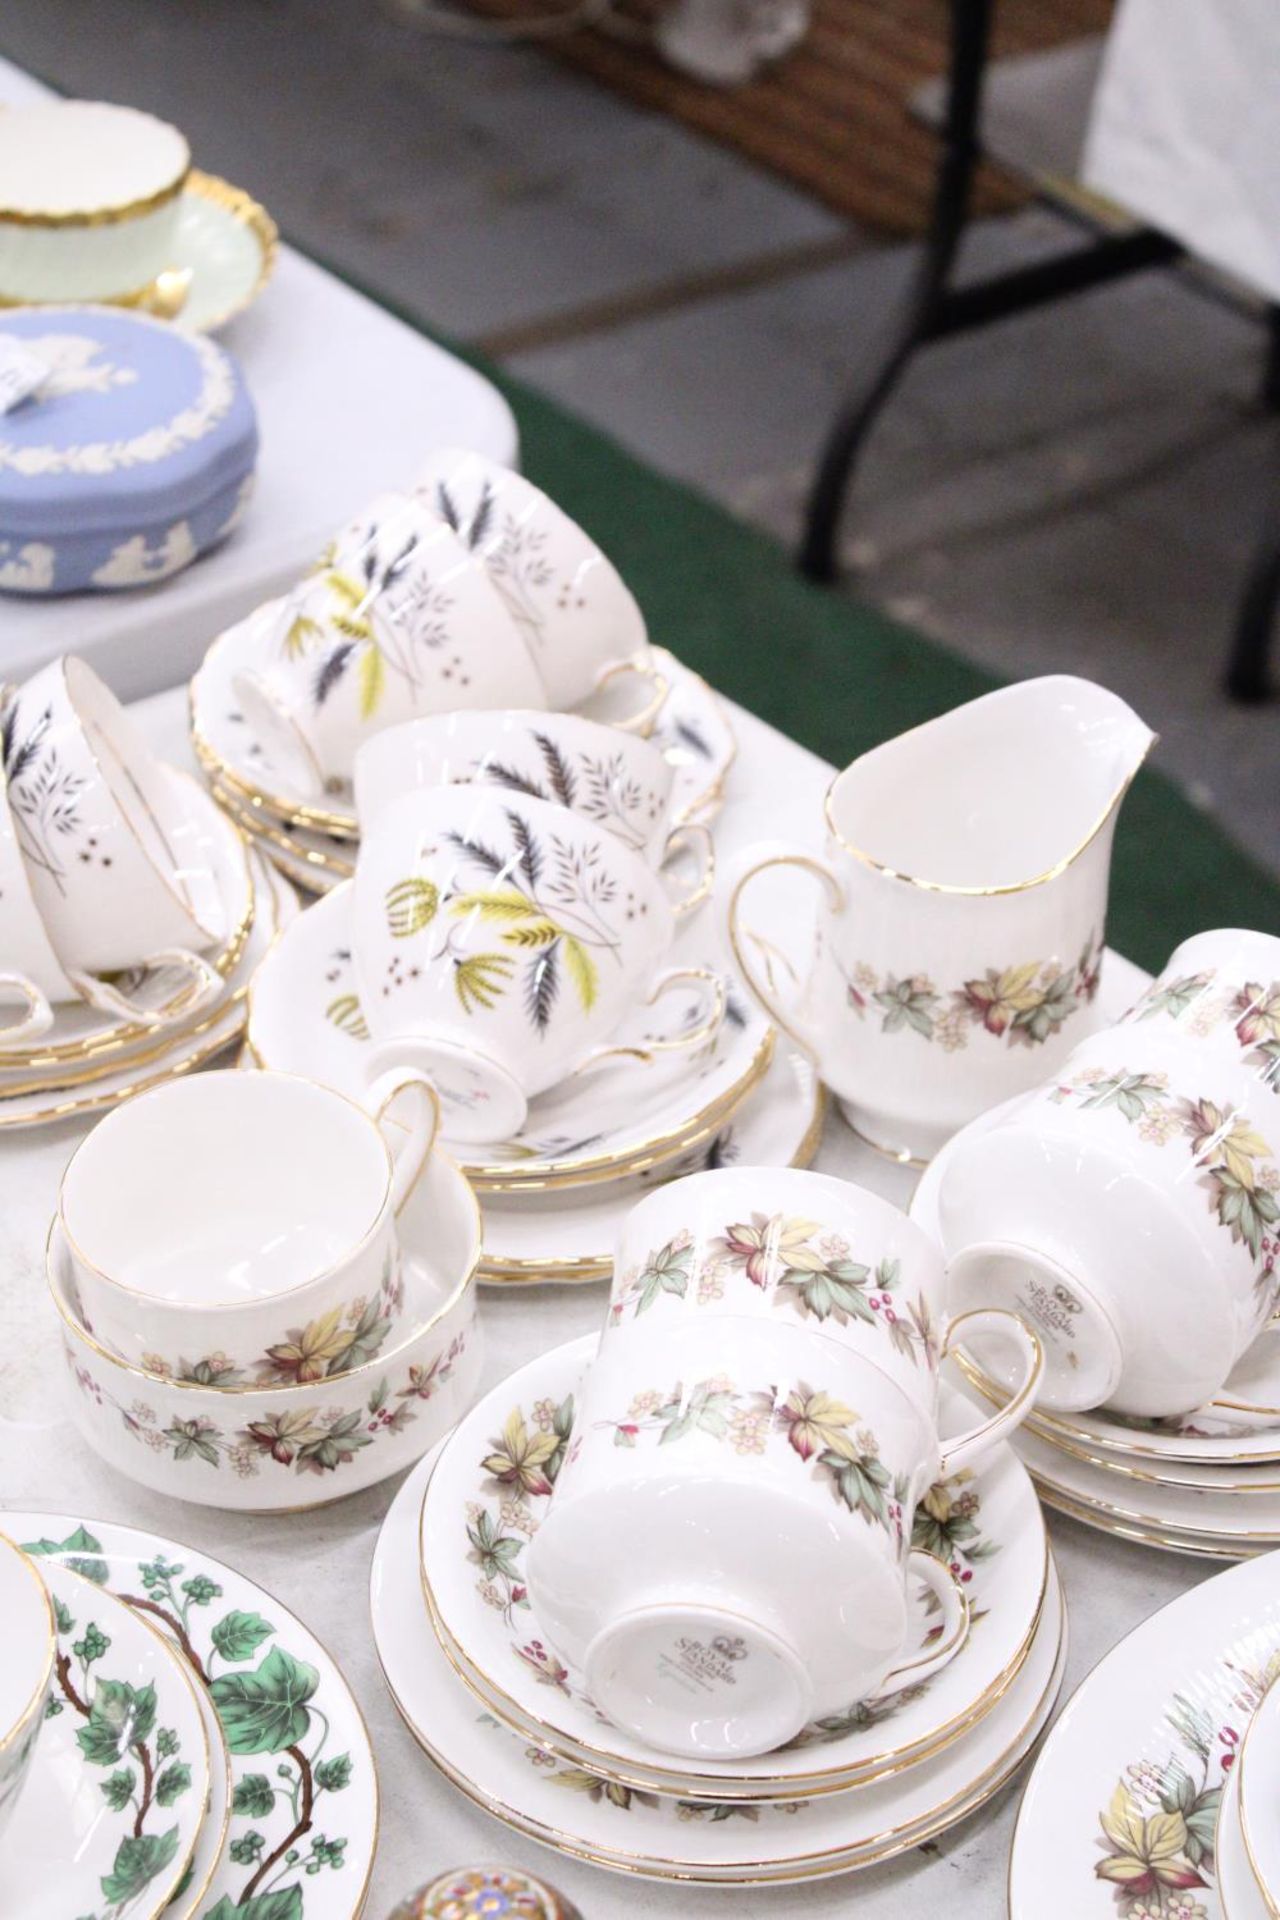 A QUANTITY OF CHINA TEAWARE TO INCLUDE ROYAL STANDARD AND COLCLOUGH - CUPS, SAUCERS, SIDE PLATES, - Image 5 of 5